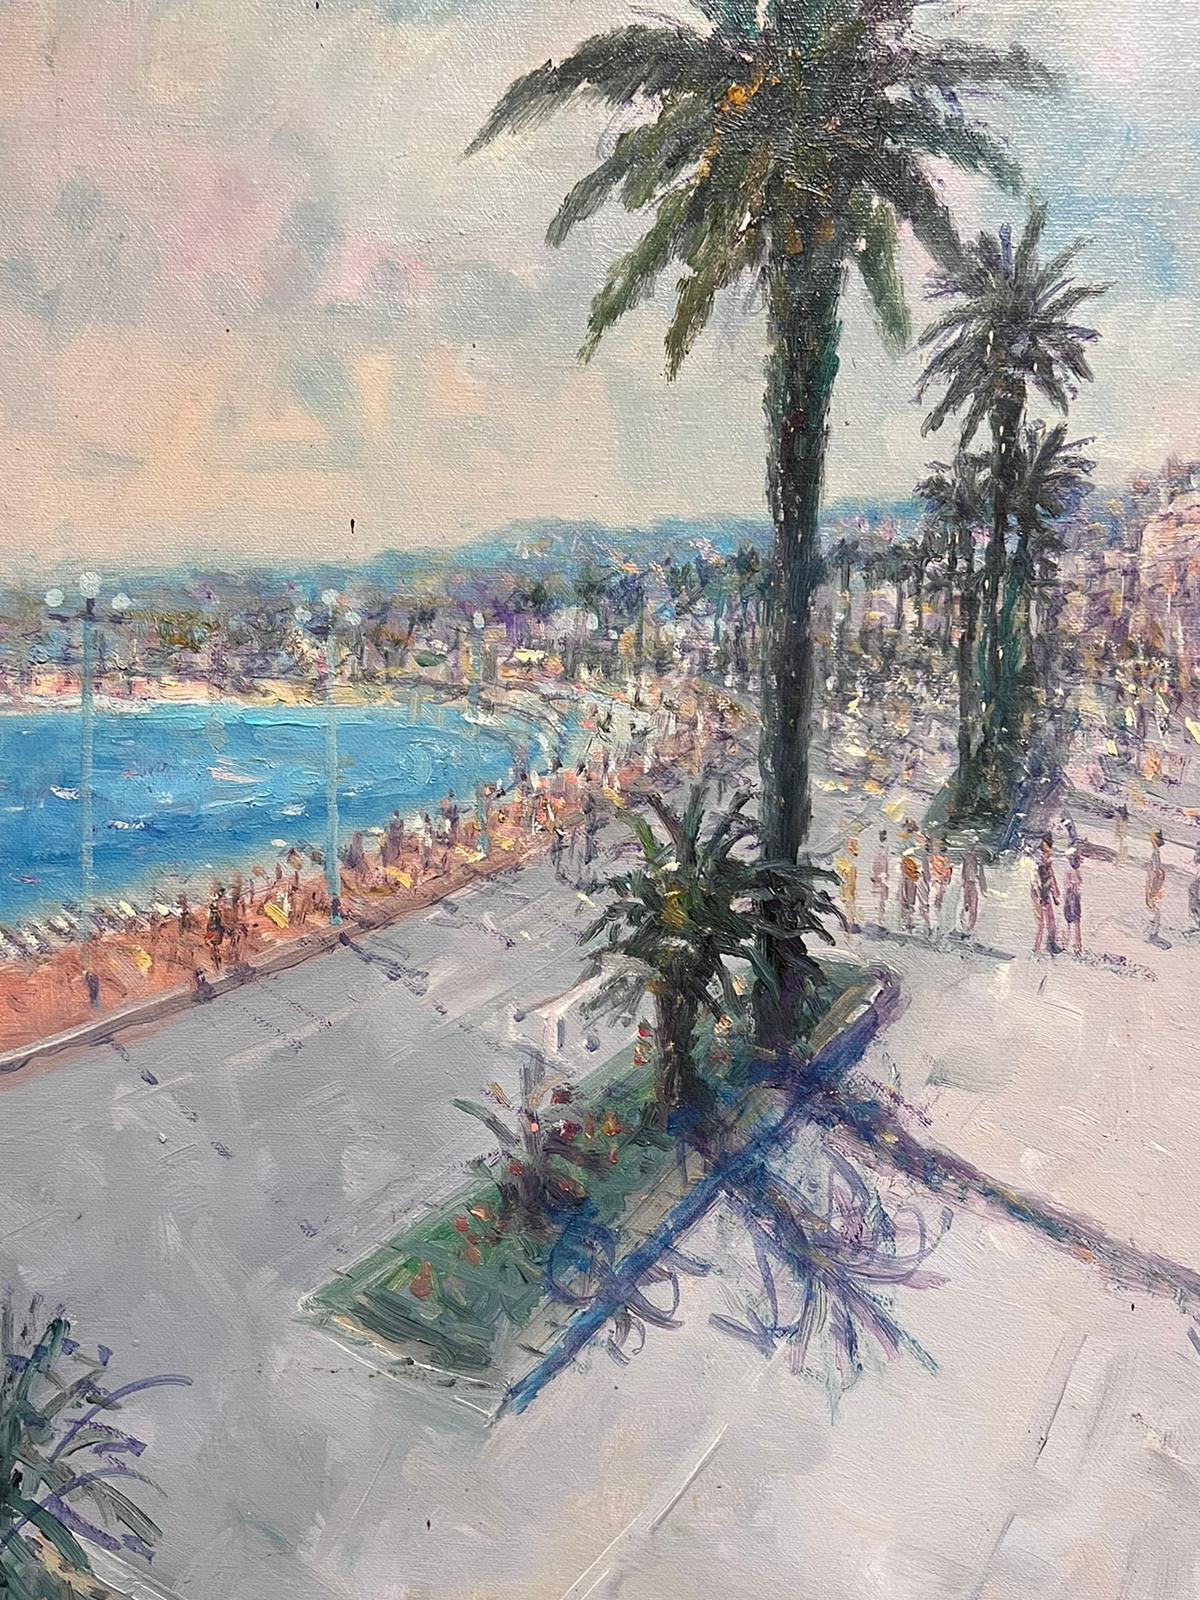 The Hotel Negresco, Nice
Promenade des Anglais, Cote d'Azur
by Laszlo Ritter (Hungarian Impressionist painter, 1937-2003)
signed oil on canvas, unframed
canvas: 28 x 30 inches
provenance: private collection, England
condition: a few minor paint loss